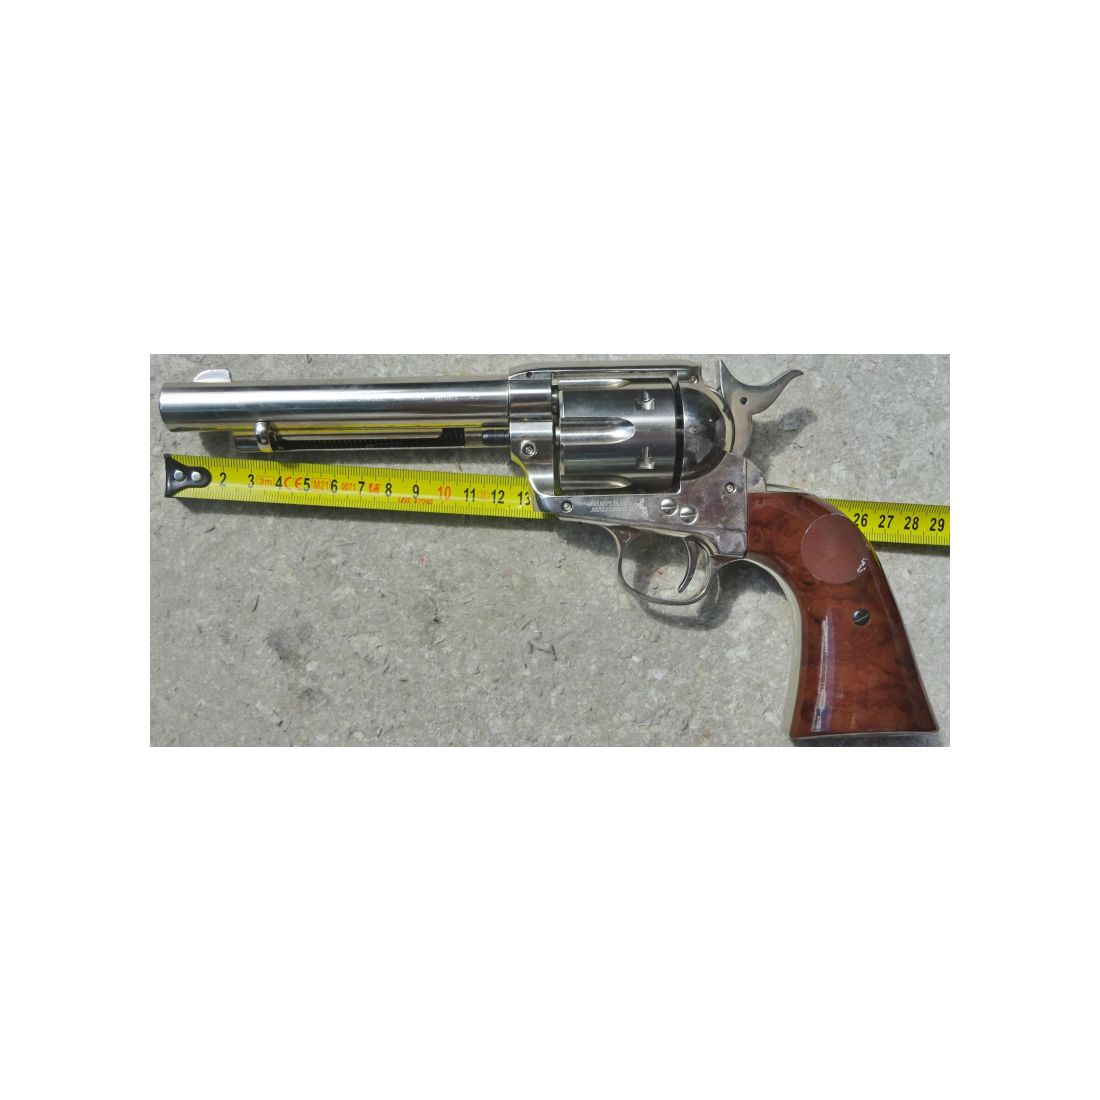 CO2-Revolver Colt Single Army in Stainless